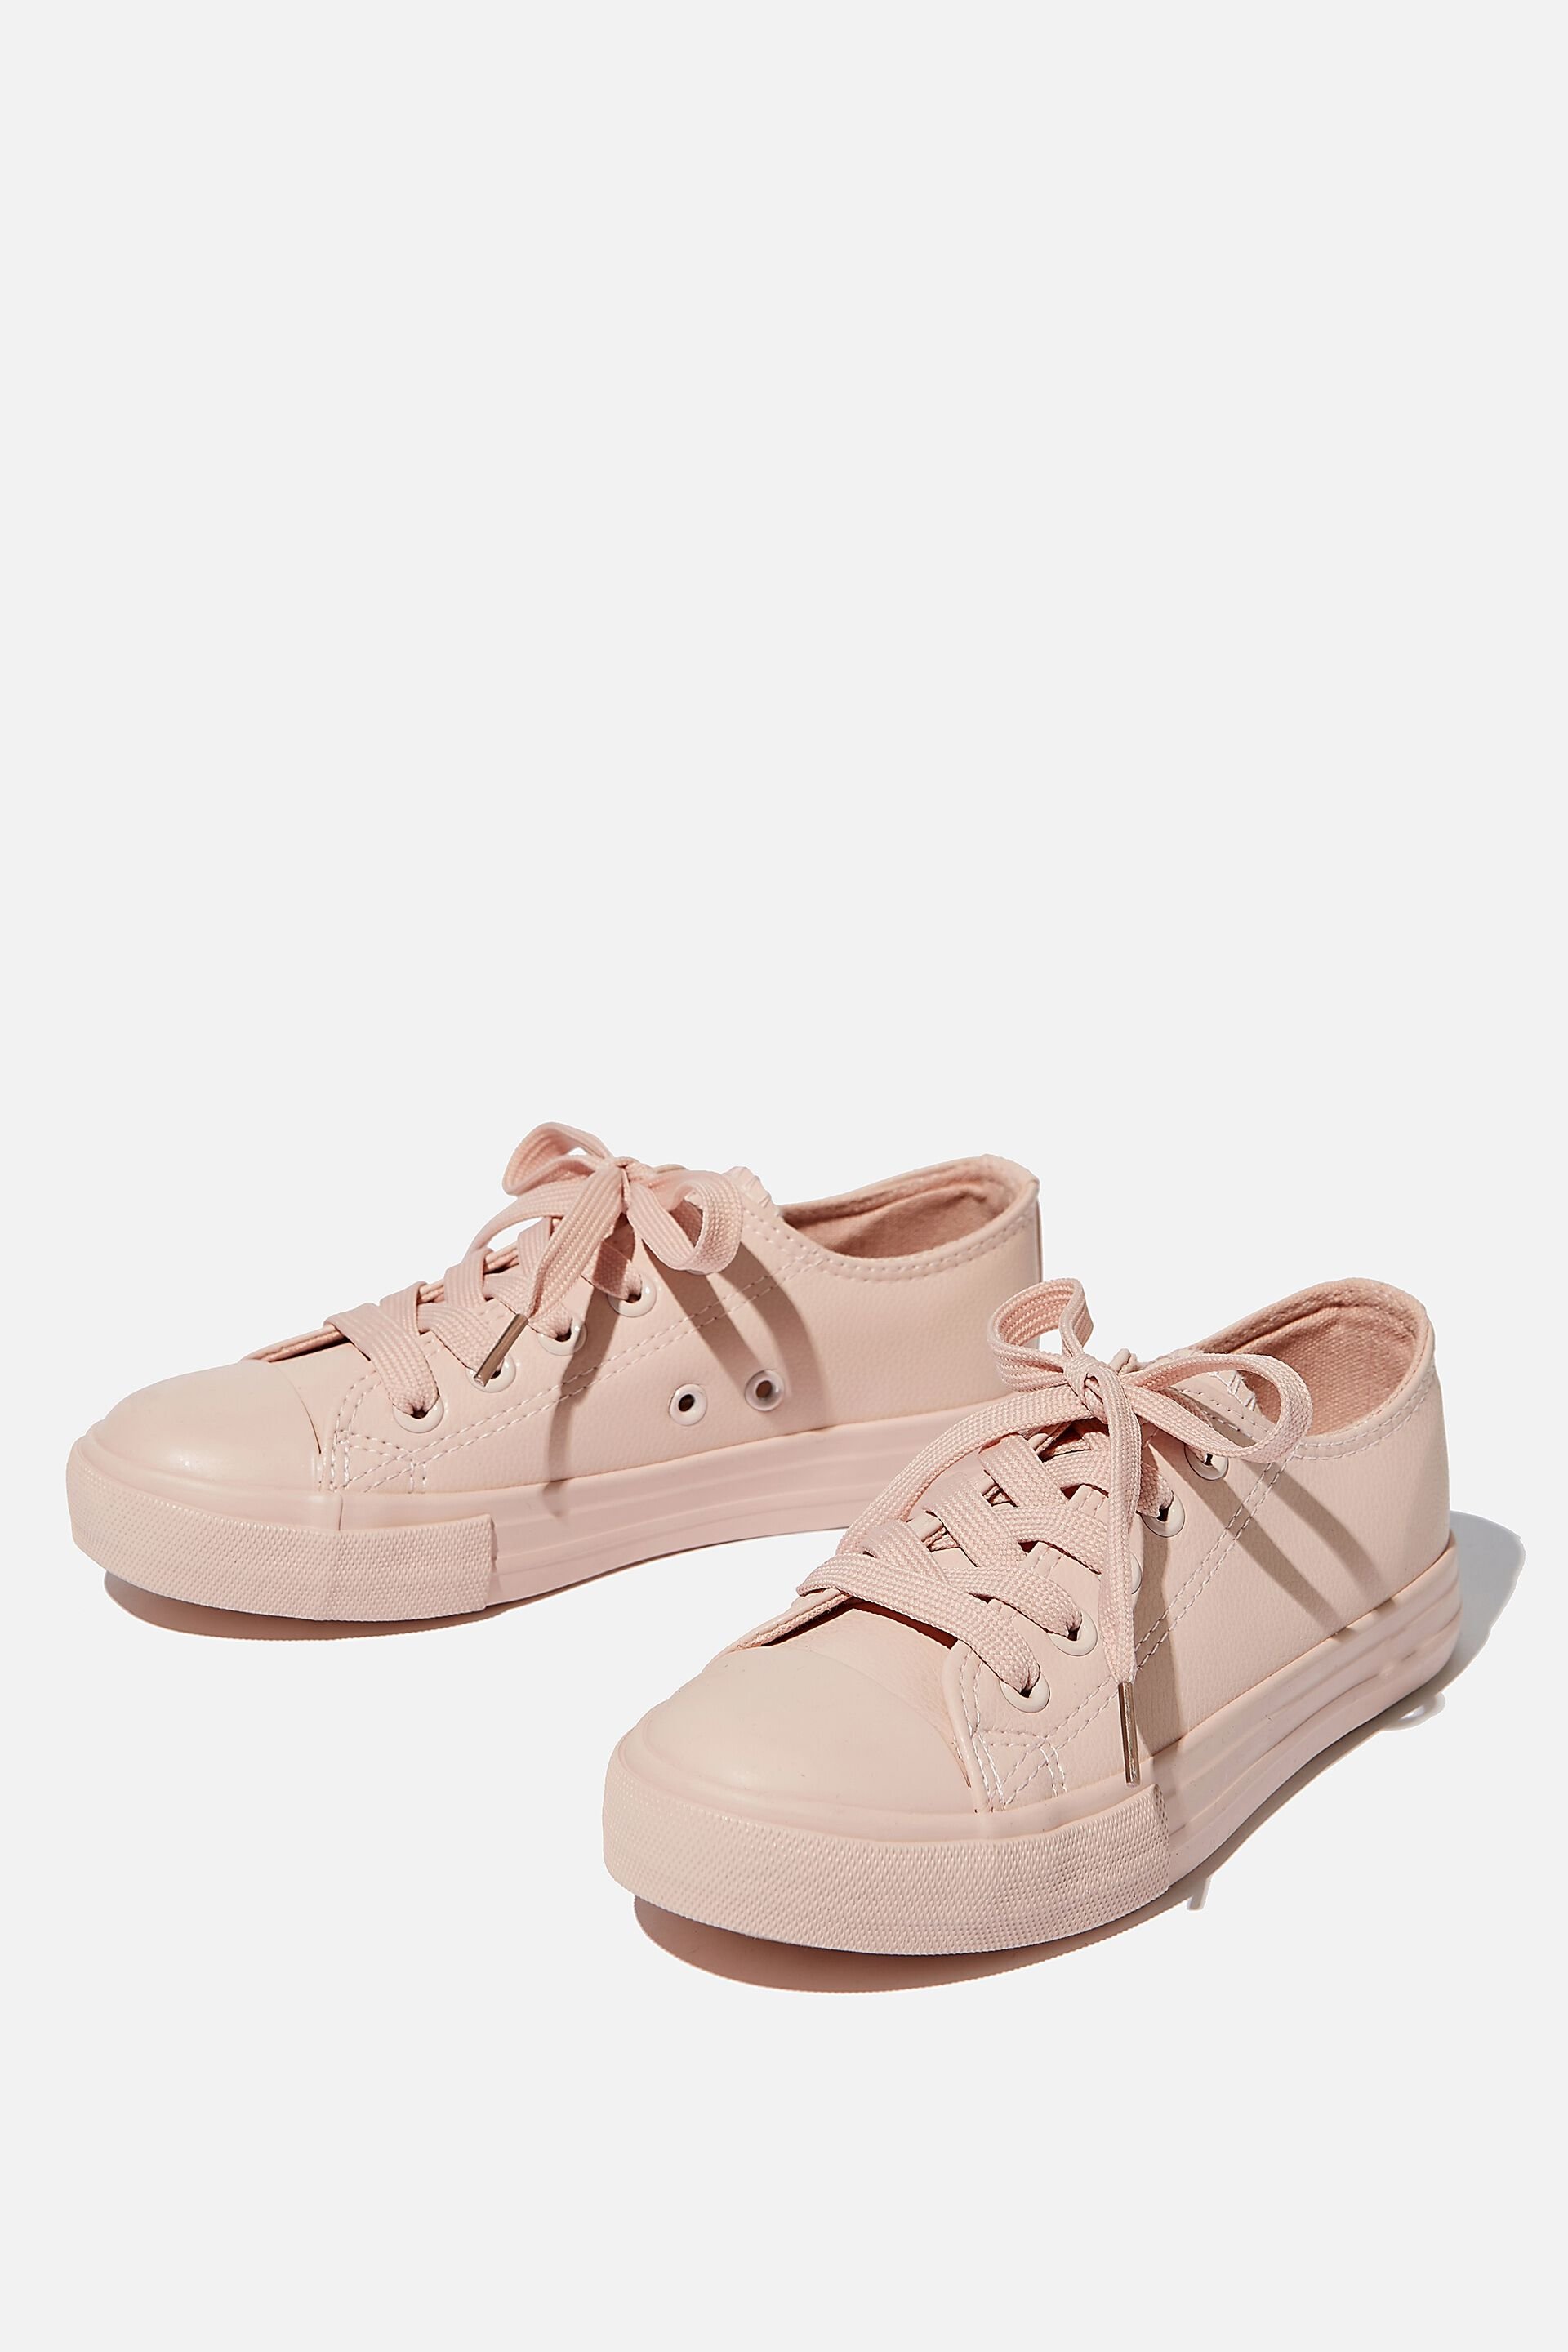 Classic Trainer Lace Up | Baby, Toddler 